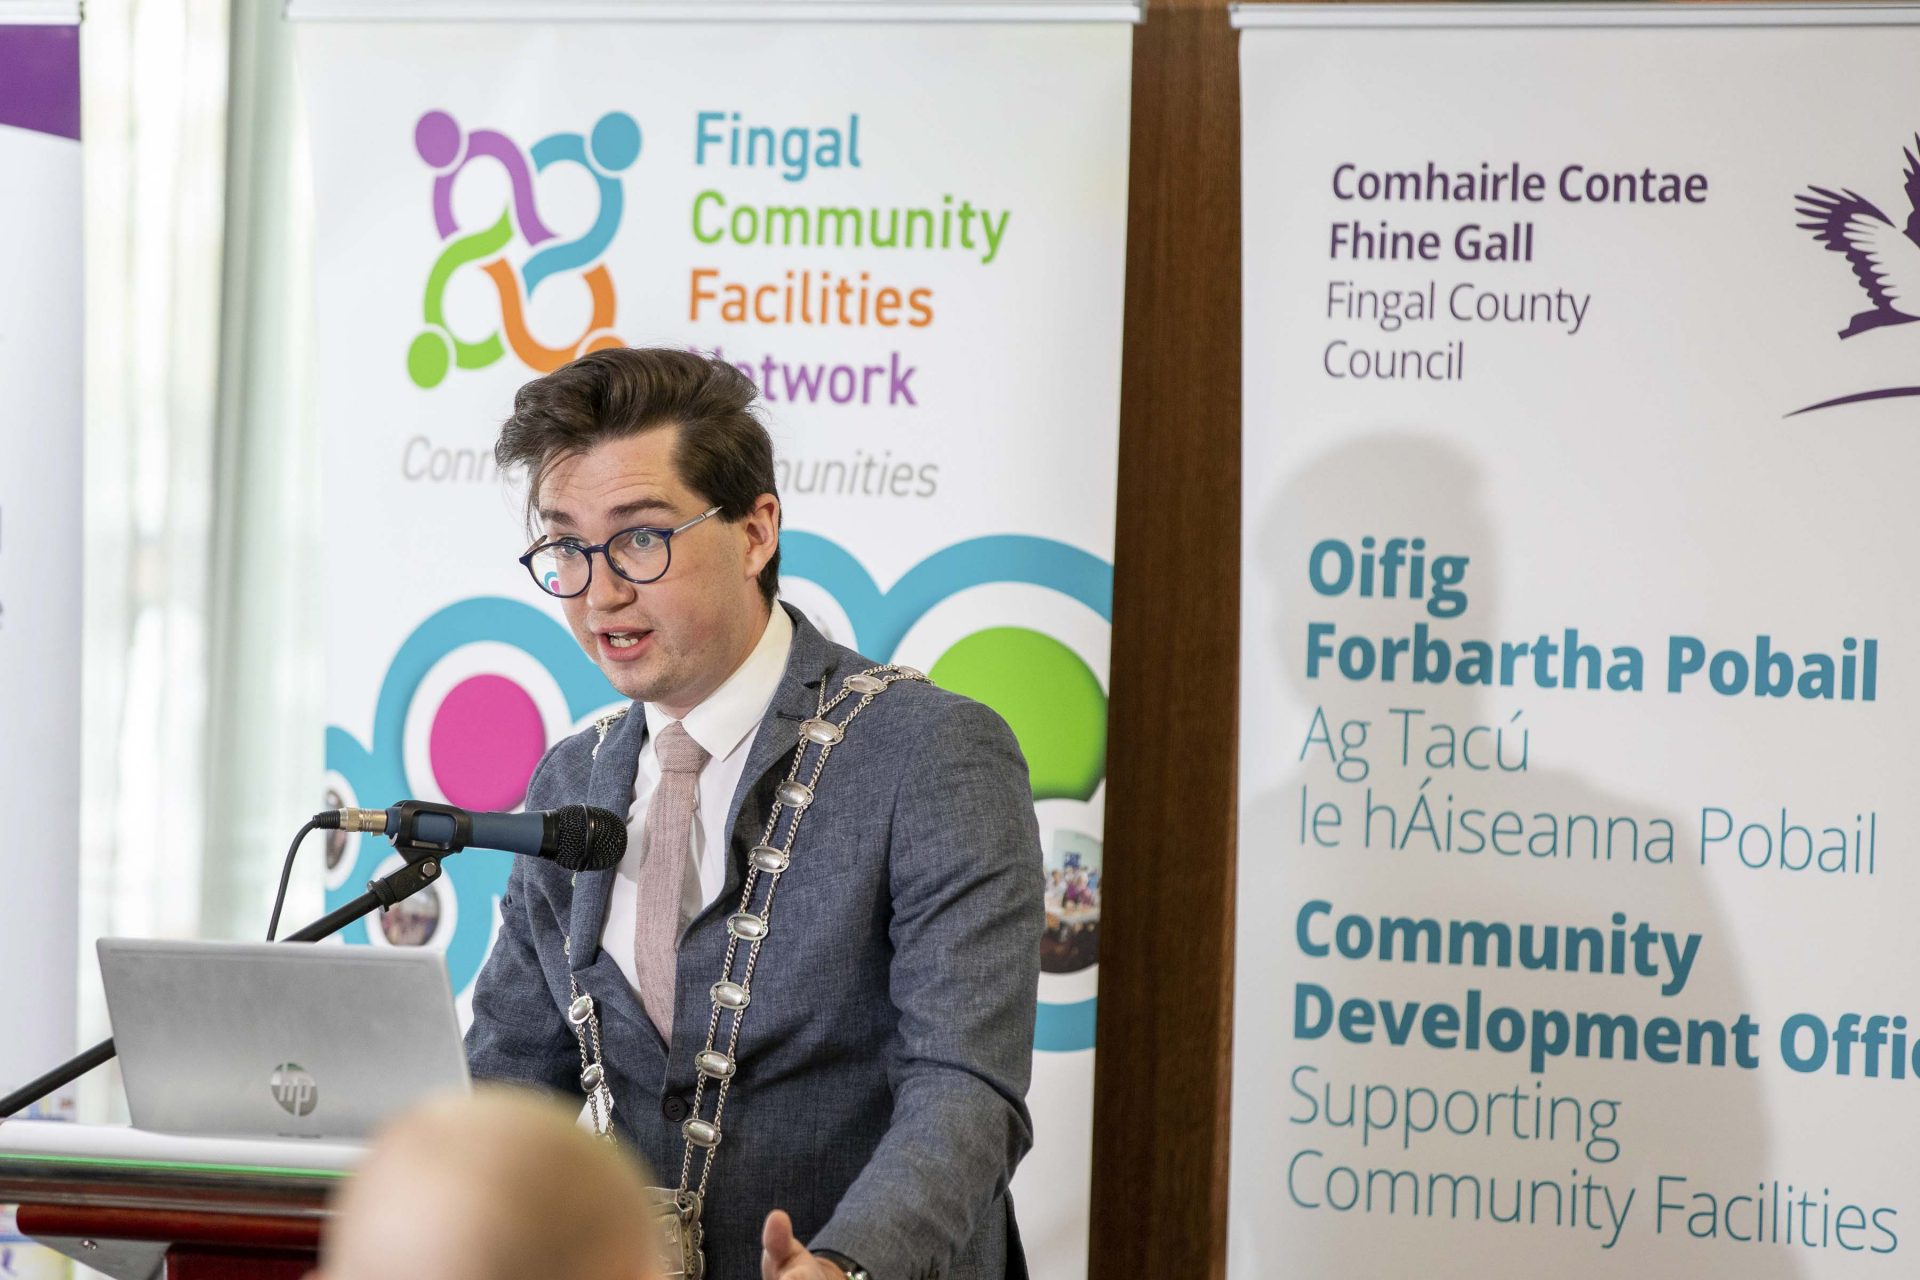 Photos from the Fingal’s ‘Keen To Be Green’ Facilities Project Launch